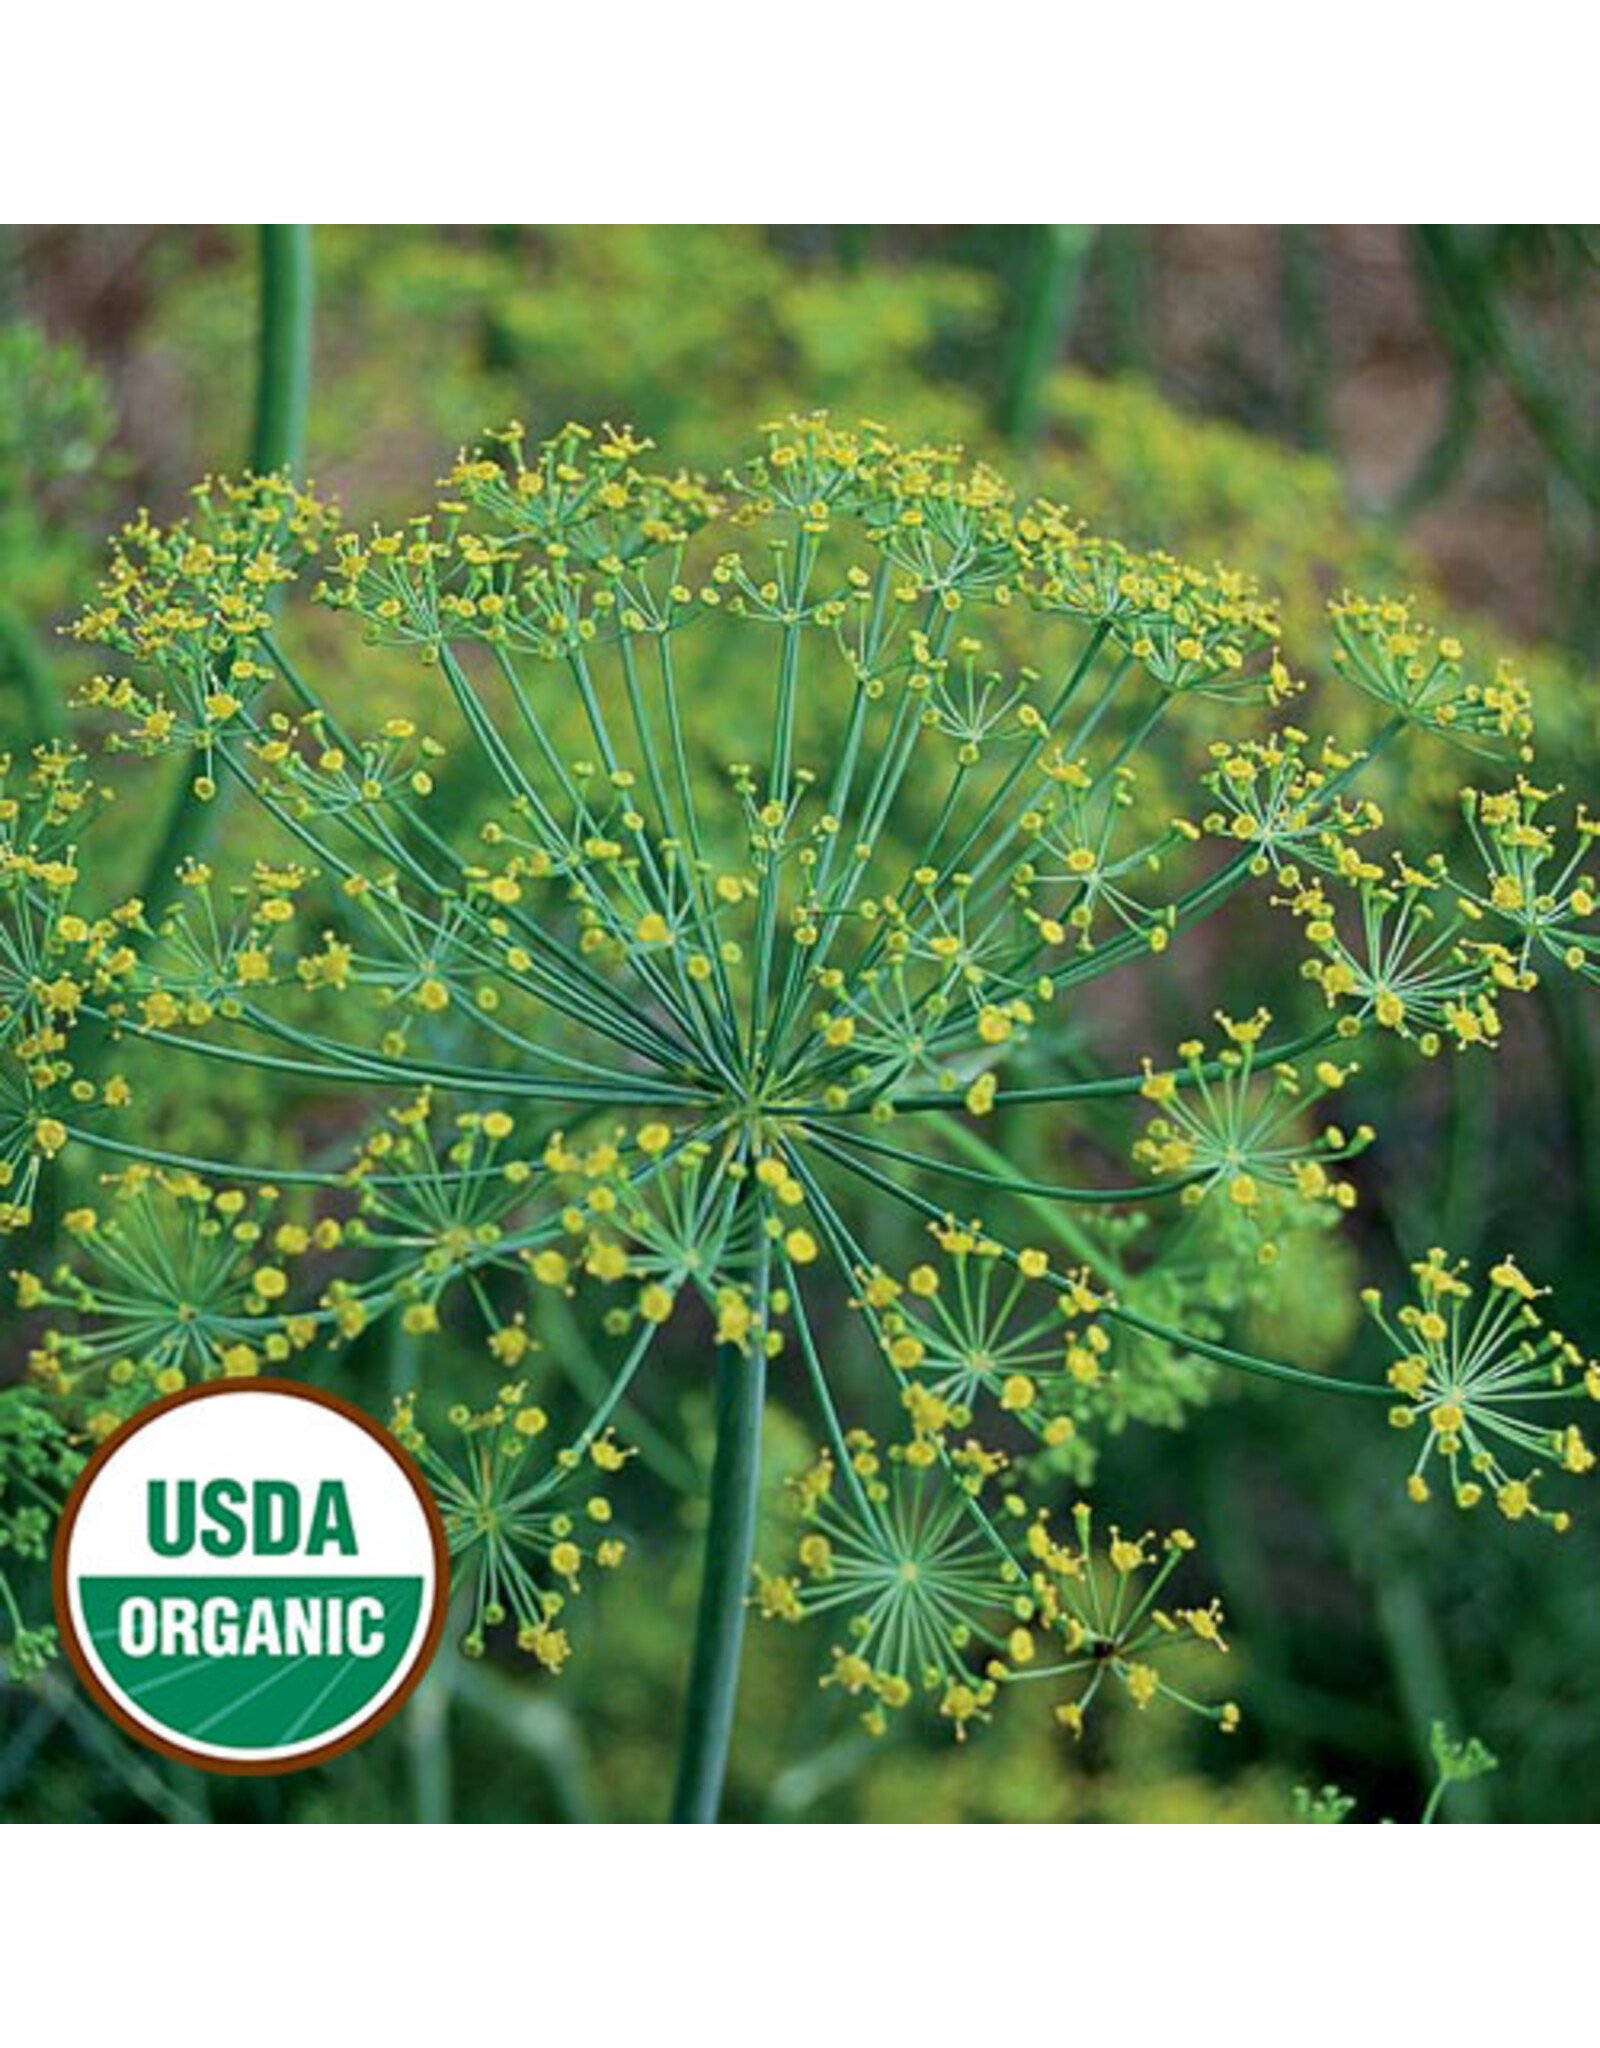 Seed Savers Herb - Dill Bouquet (organic)